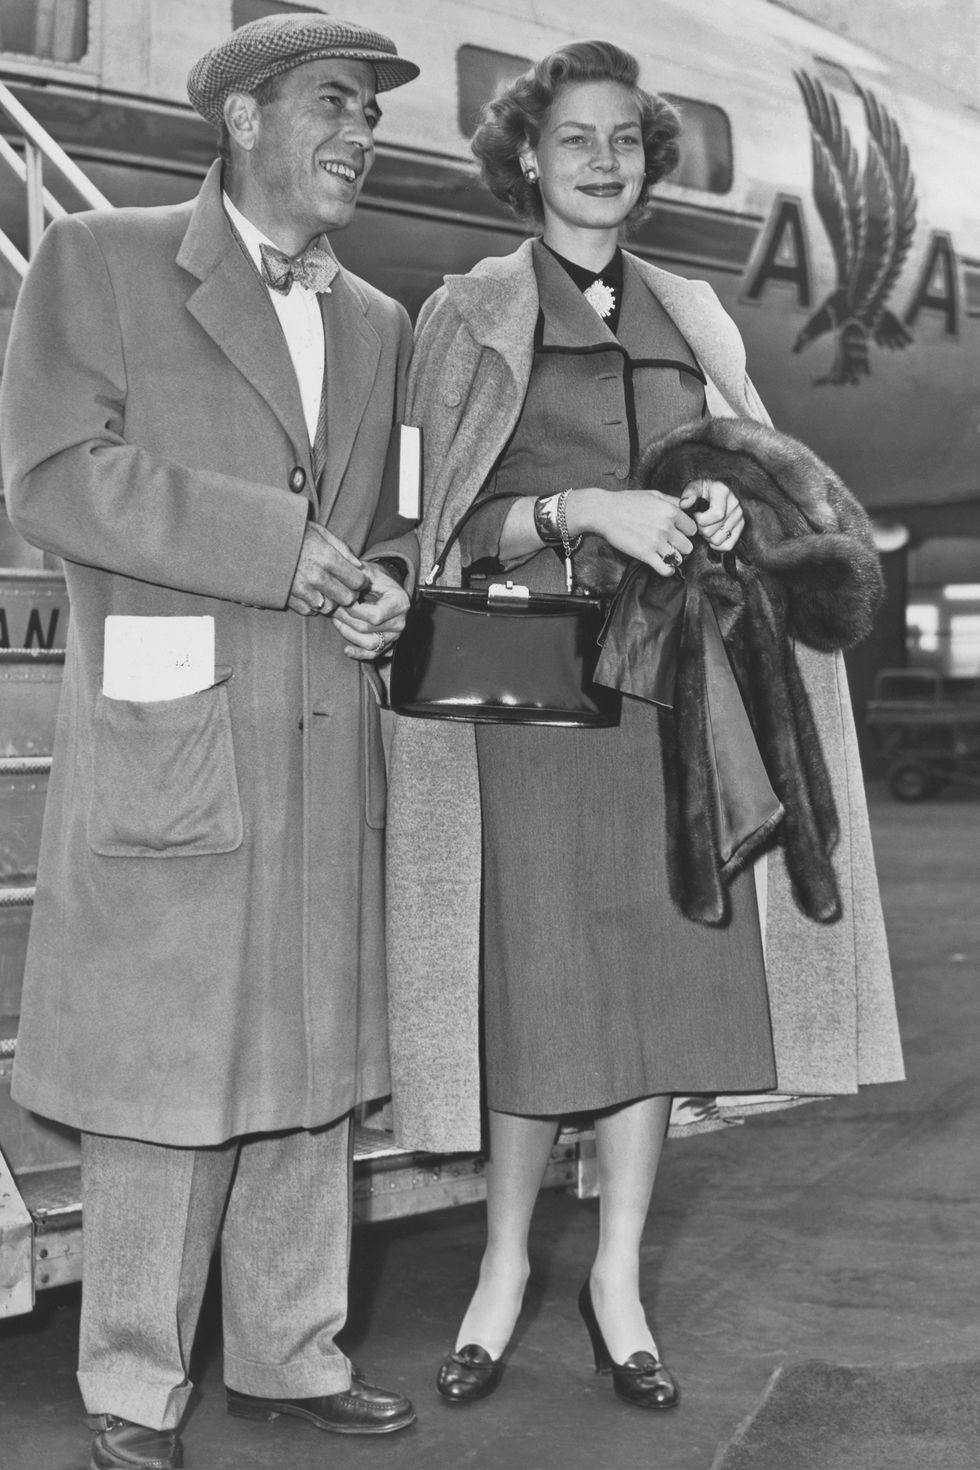 American actor Humphrey Bogart (1899 – 1957) with wife actress Lauren Bacall on the tarmac at La Guardia airport, New York on October 13, 1950. They were in New York to appear in the Theatre Guild's production of 'Farewell to Arms'. (Photo by Pictorial Parade/Archive Photos/Getty Images)